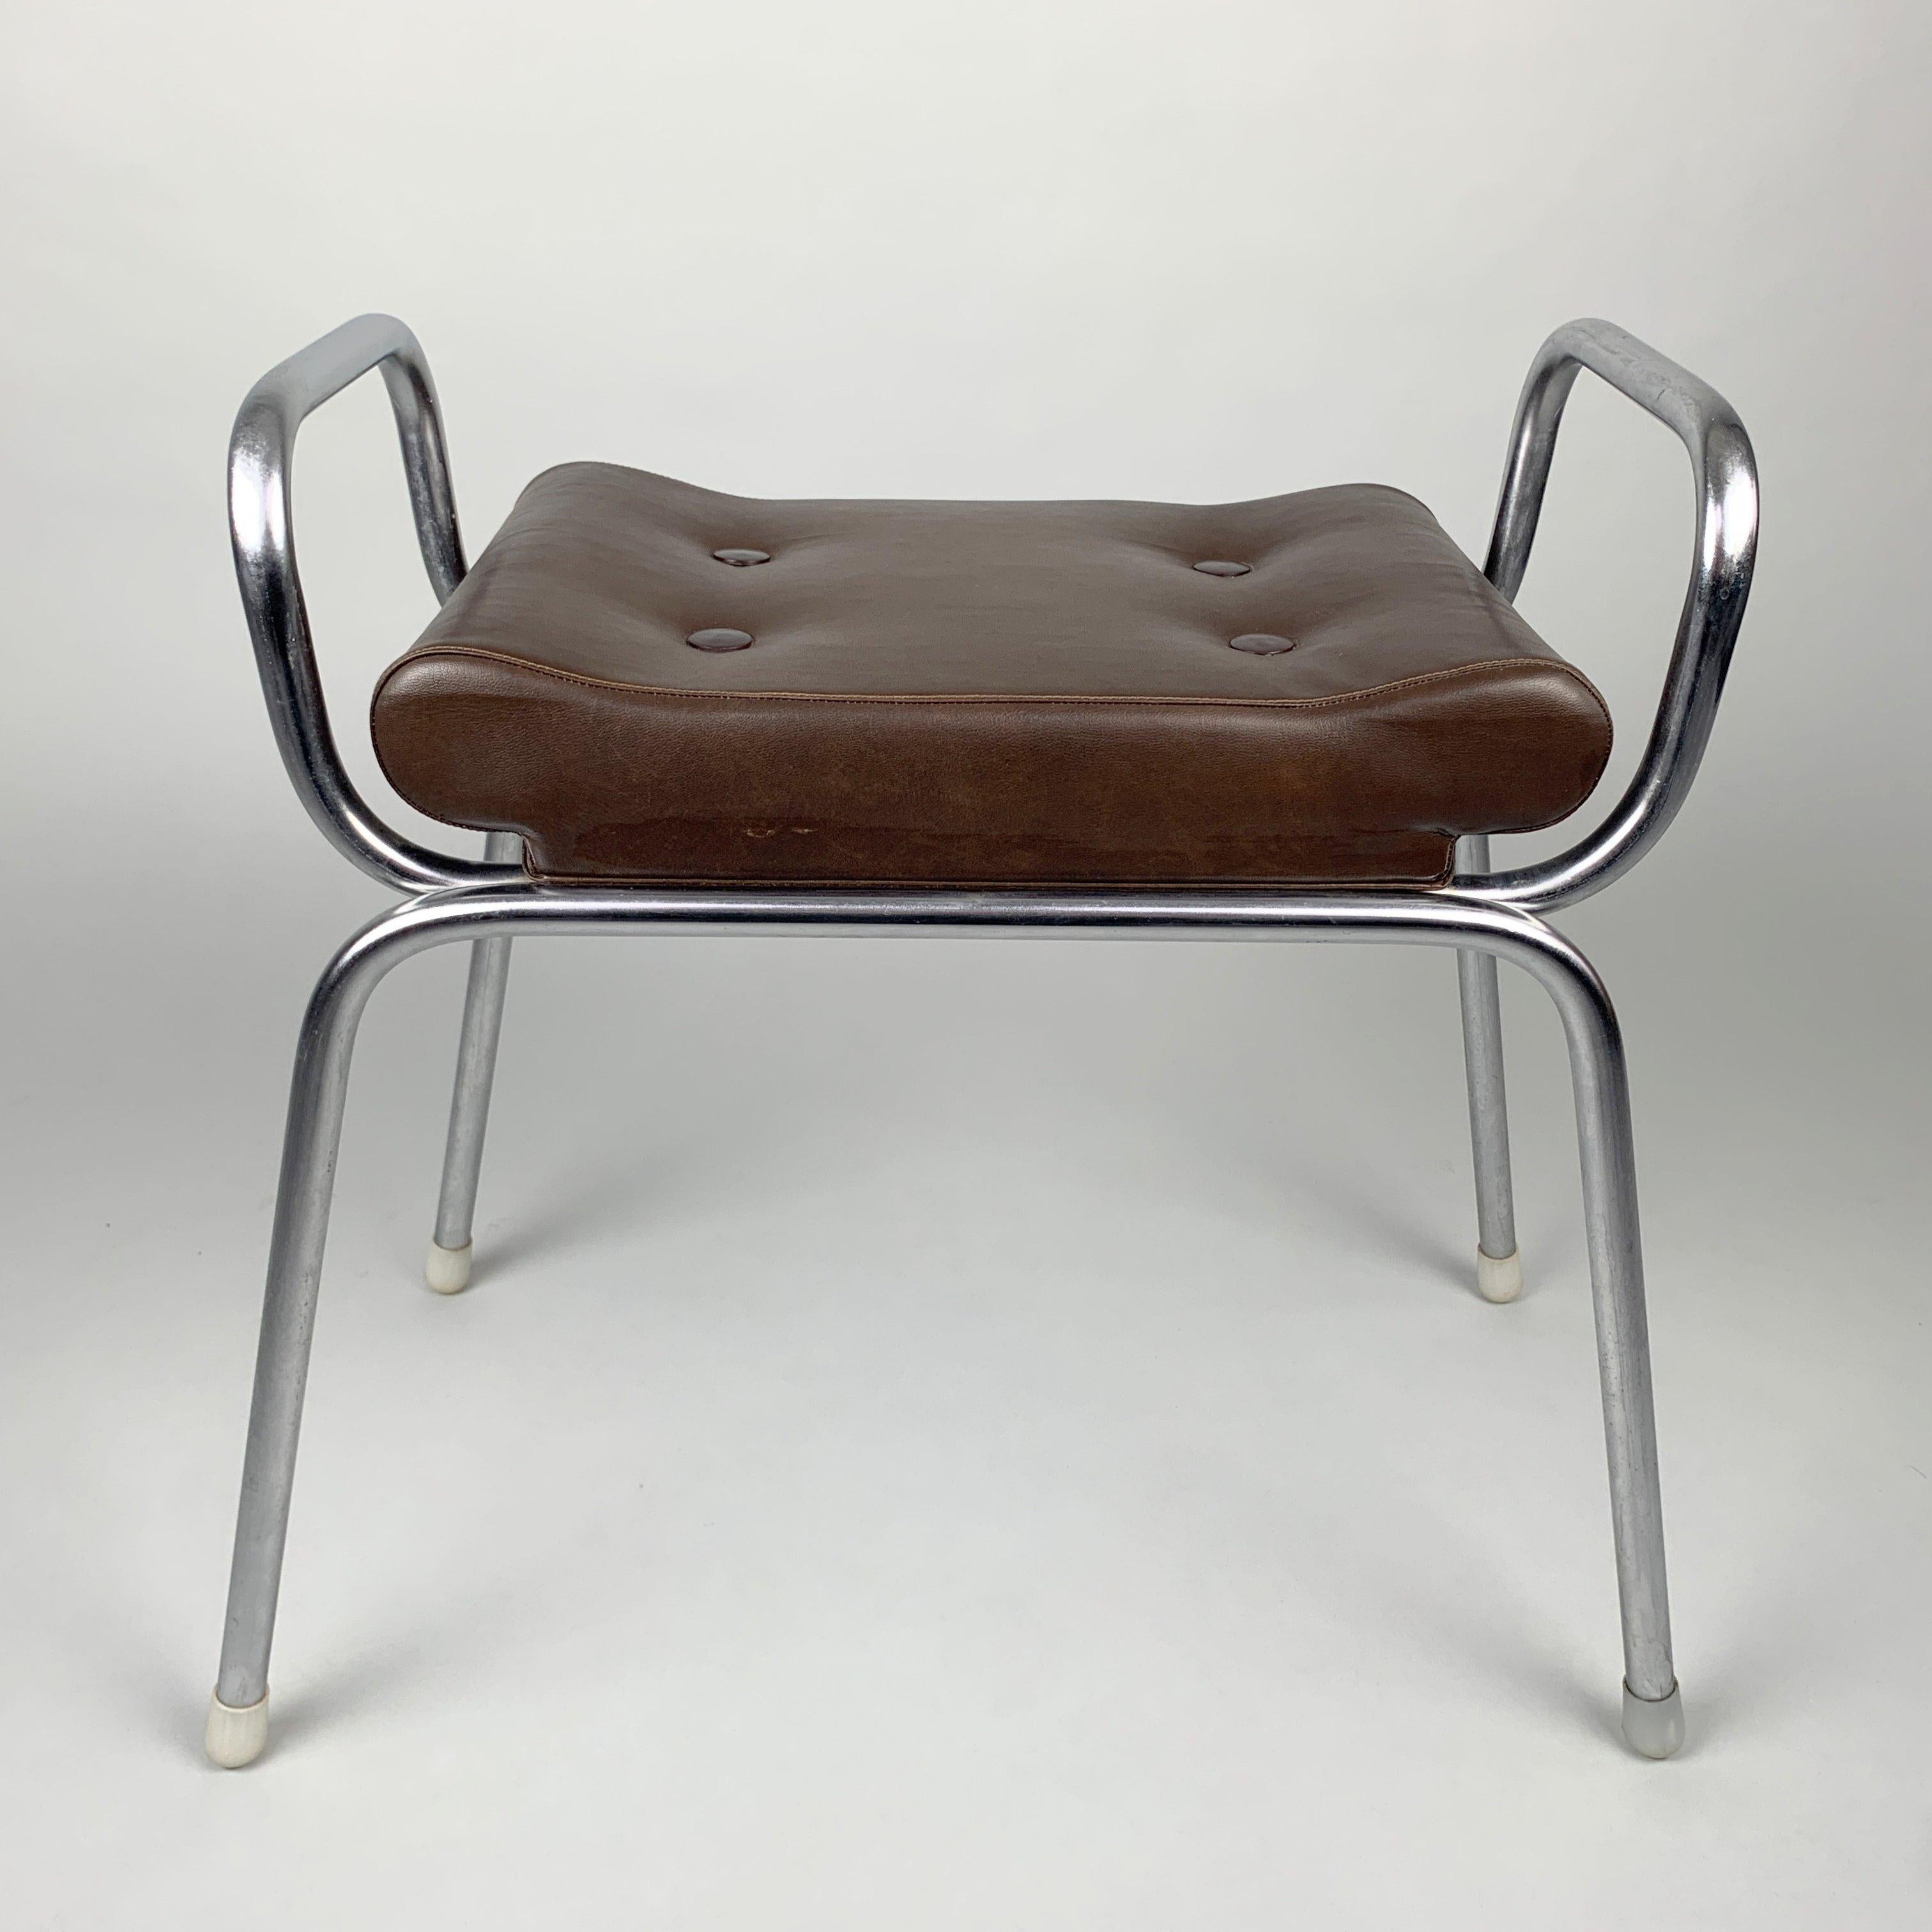 Beautiful vintage chrome and artificial leather stool from former Czechoslovakia. Overall the chair is in very good condition, except for a small defect in the upholstery (see photo).